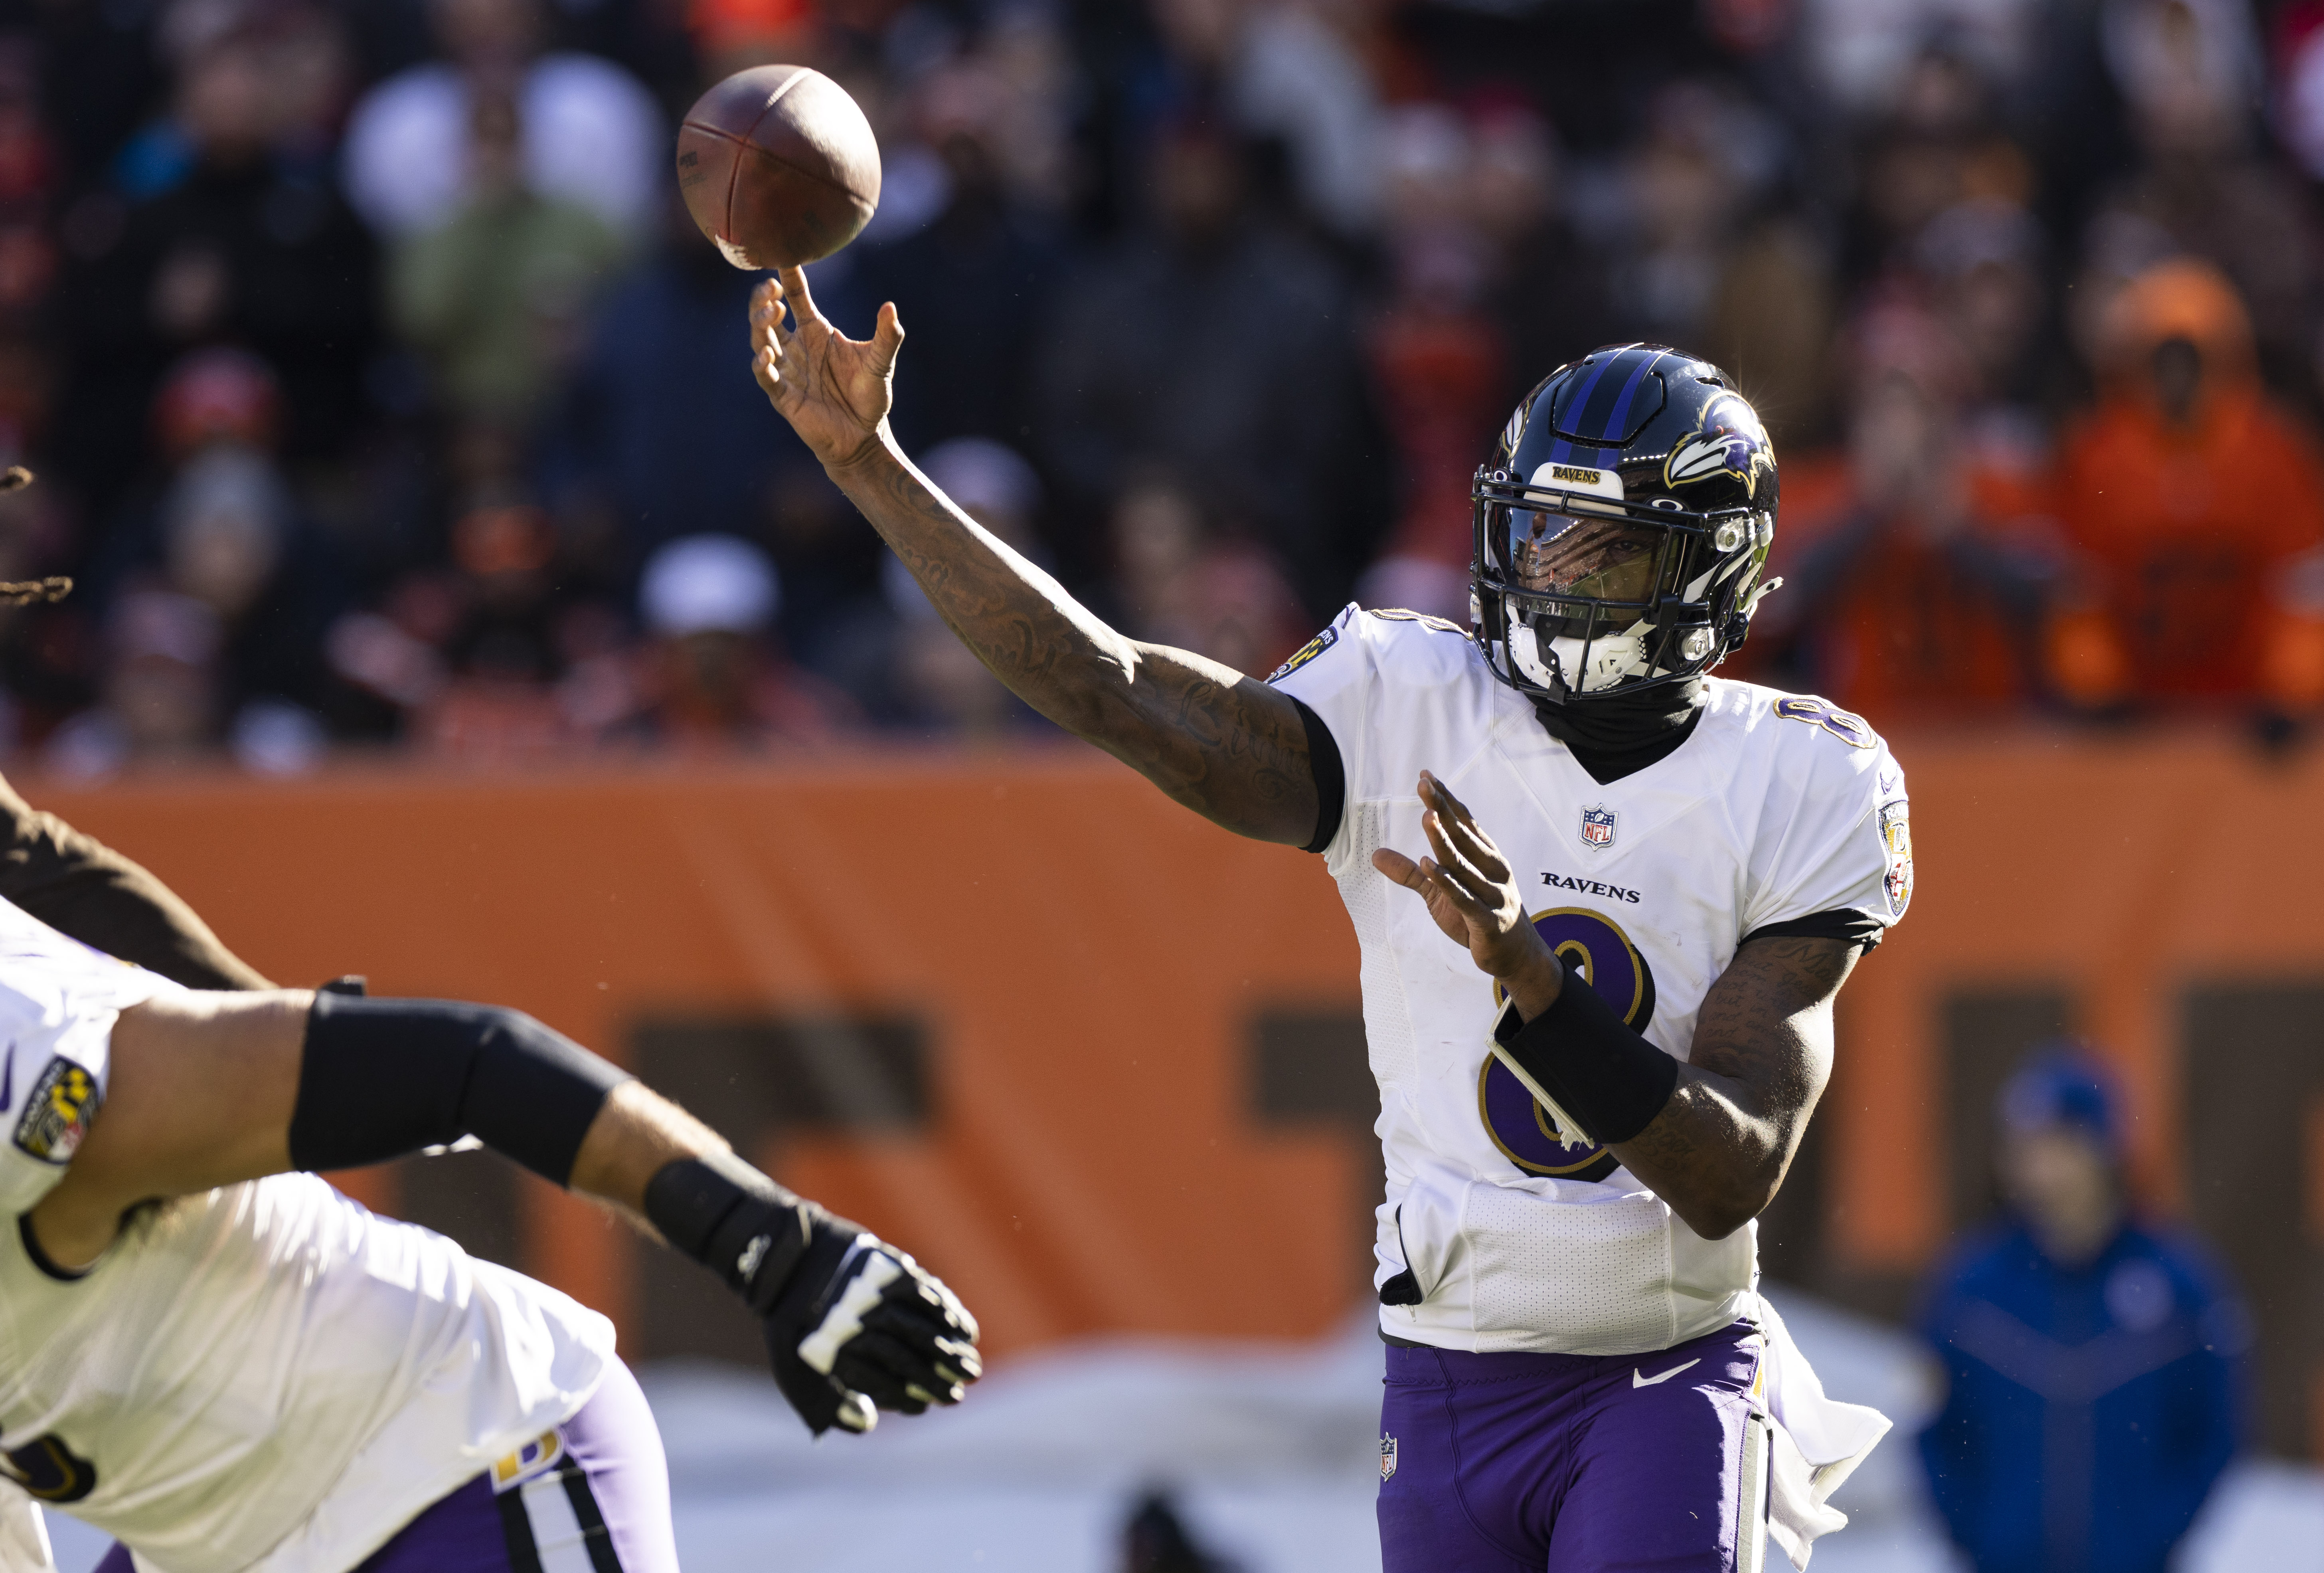 Baltimore Ravens quarterback Lamar Jackson (8) throws the ball against the Cleveland Browns during the first quarter at FirstEnergy Stadium.